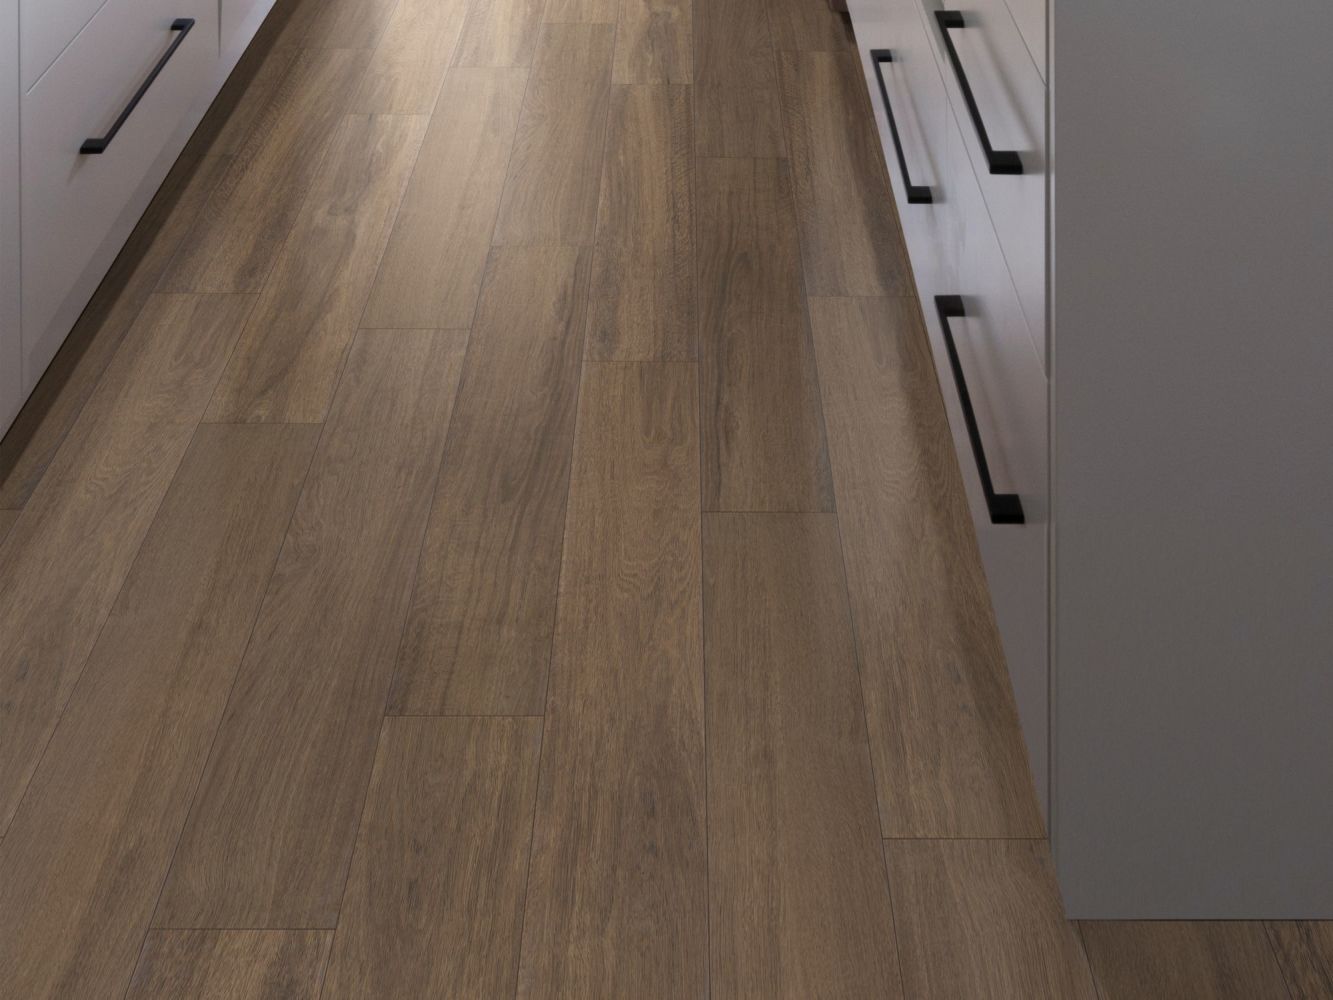 Resilient Residential Pantheon Hd+ Natural Bevel Shaw Floors  Cordovan 07233_1051V